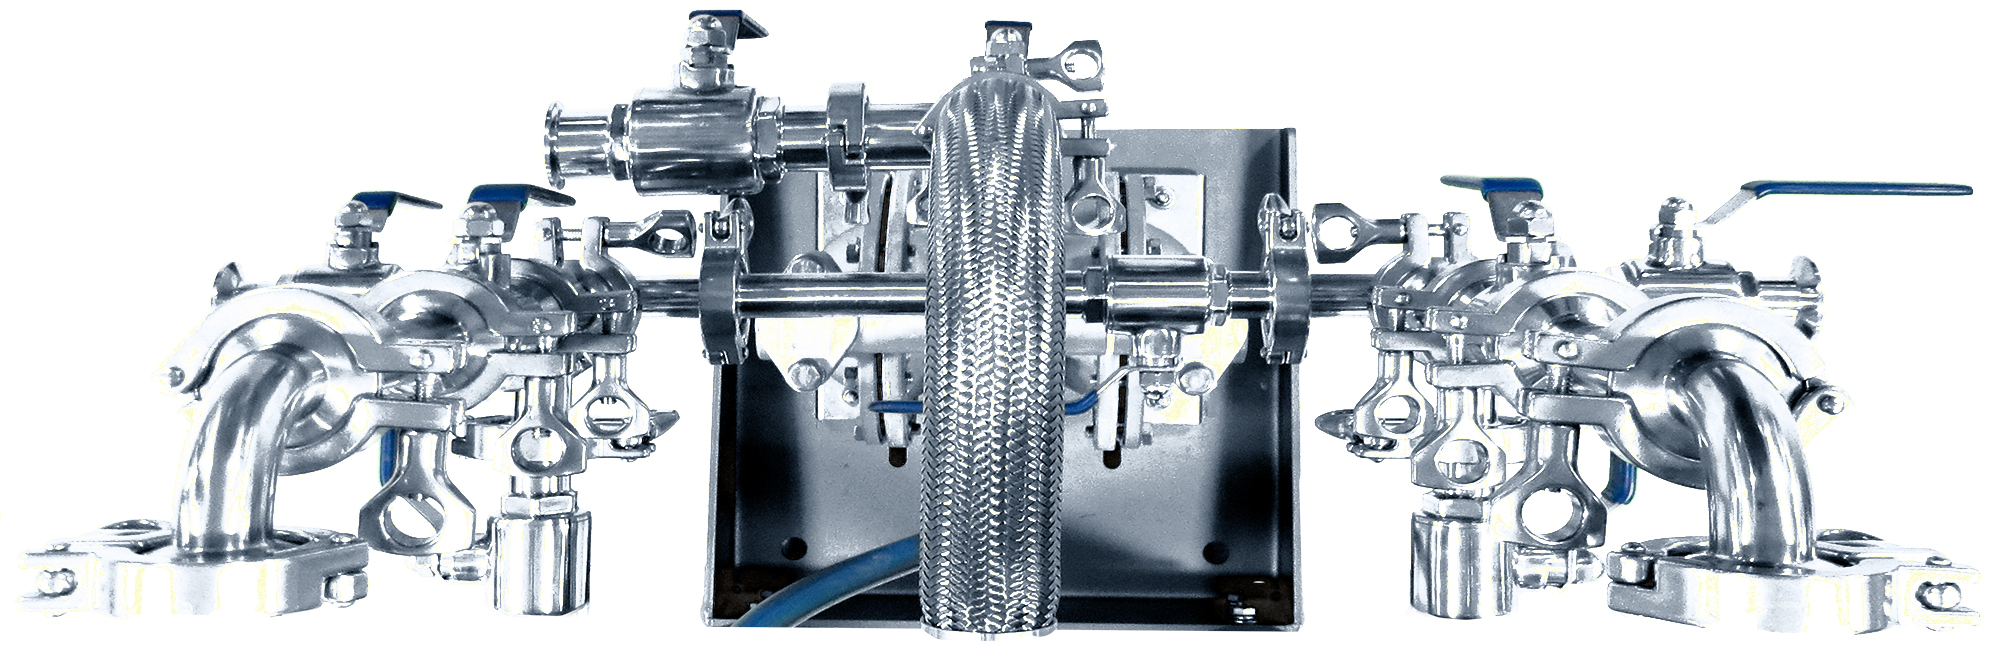 The Pro-X™ Filter Press is specifically engineered for the food, beverage, and pharmaceutical industries, along with other sanitary applications.